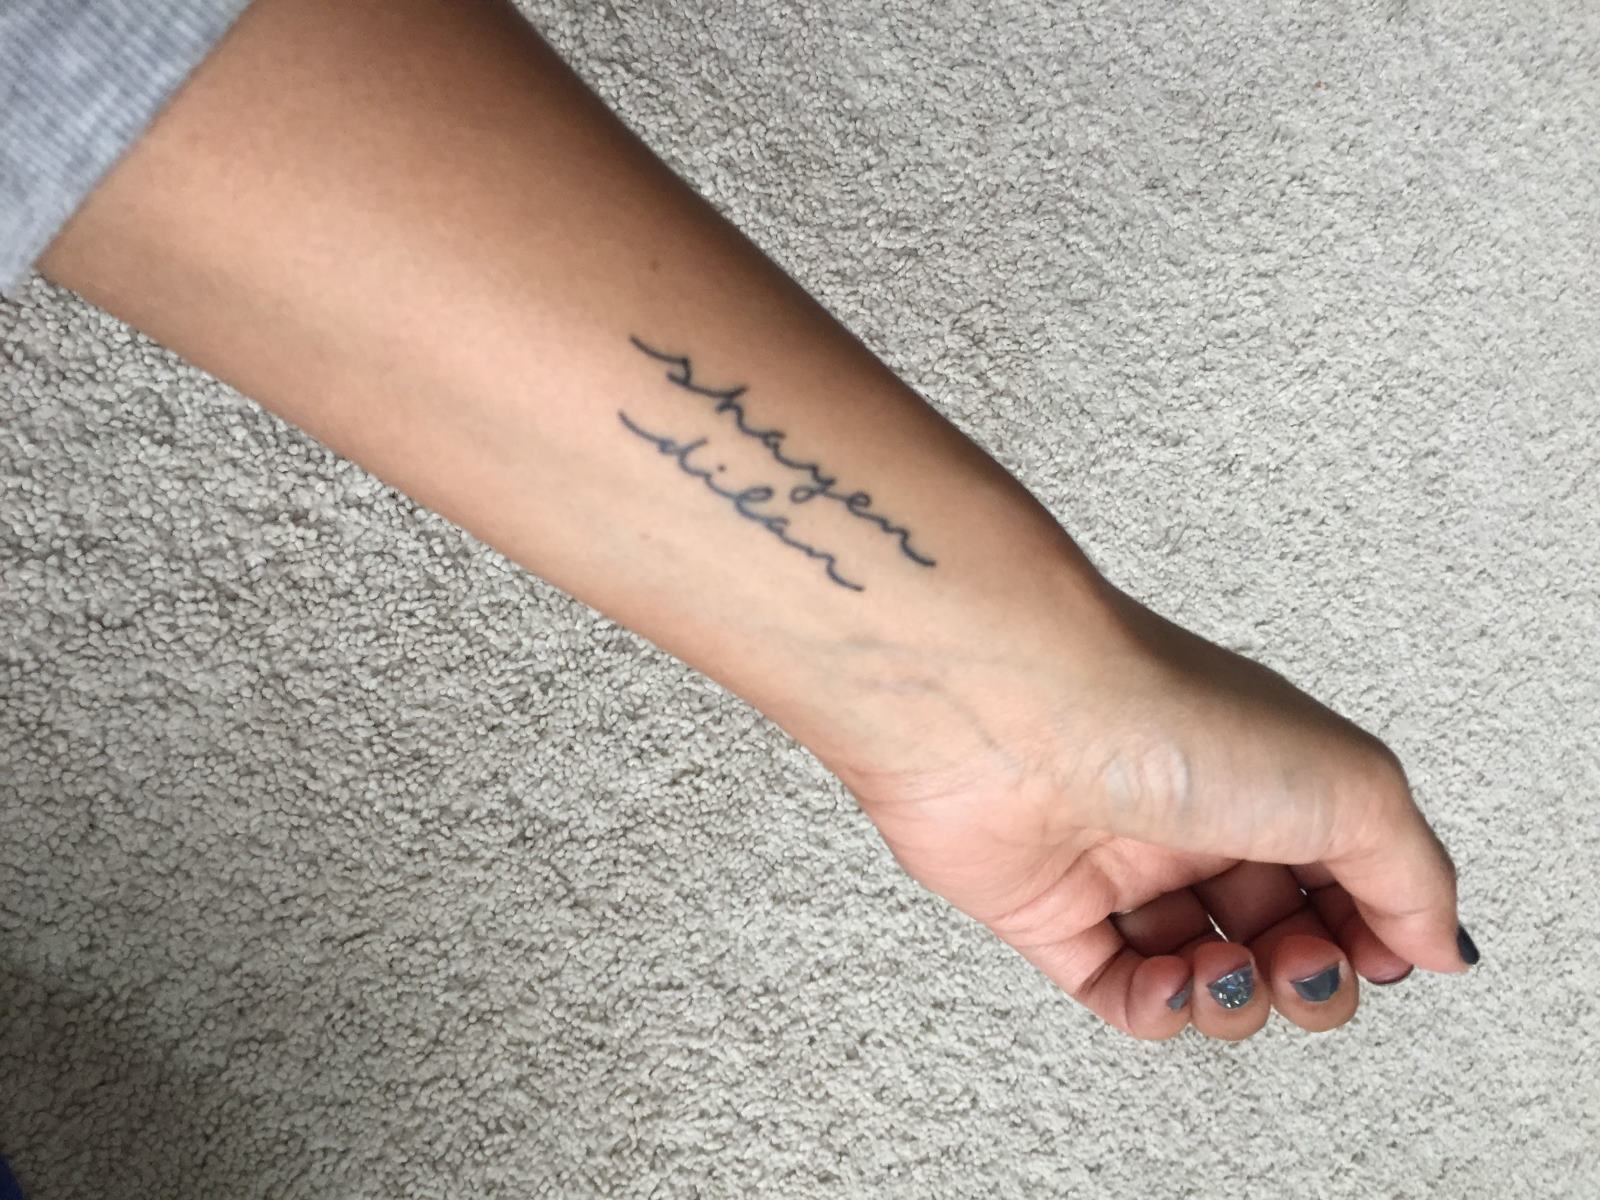 The Hidden Meaning Behind Scripted Wrist Tattoos With Names